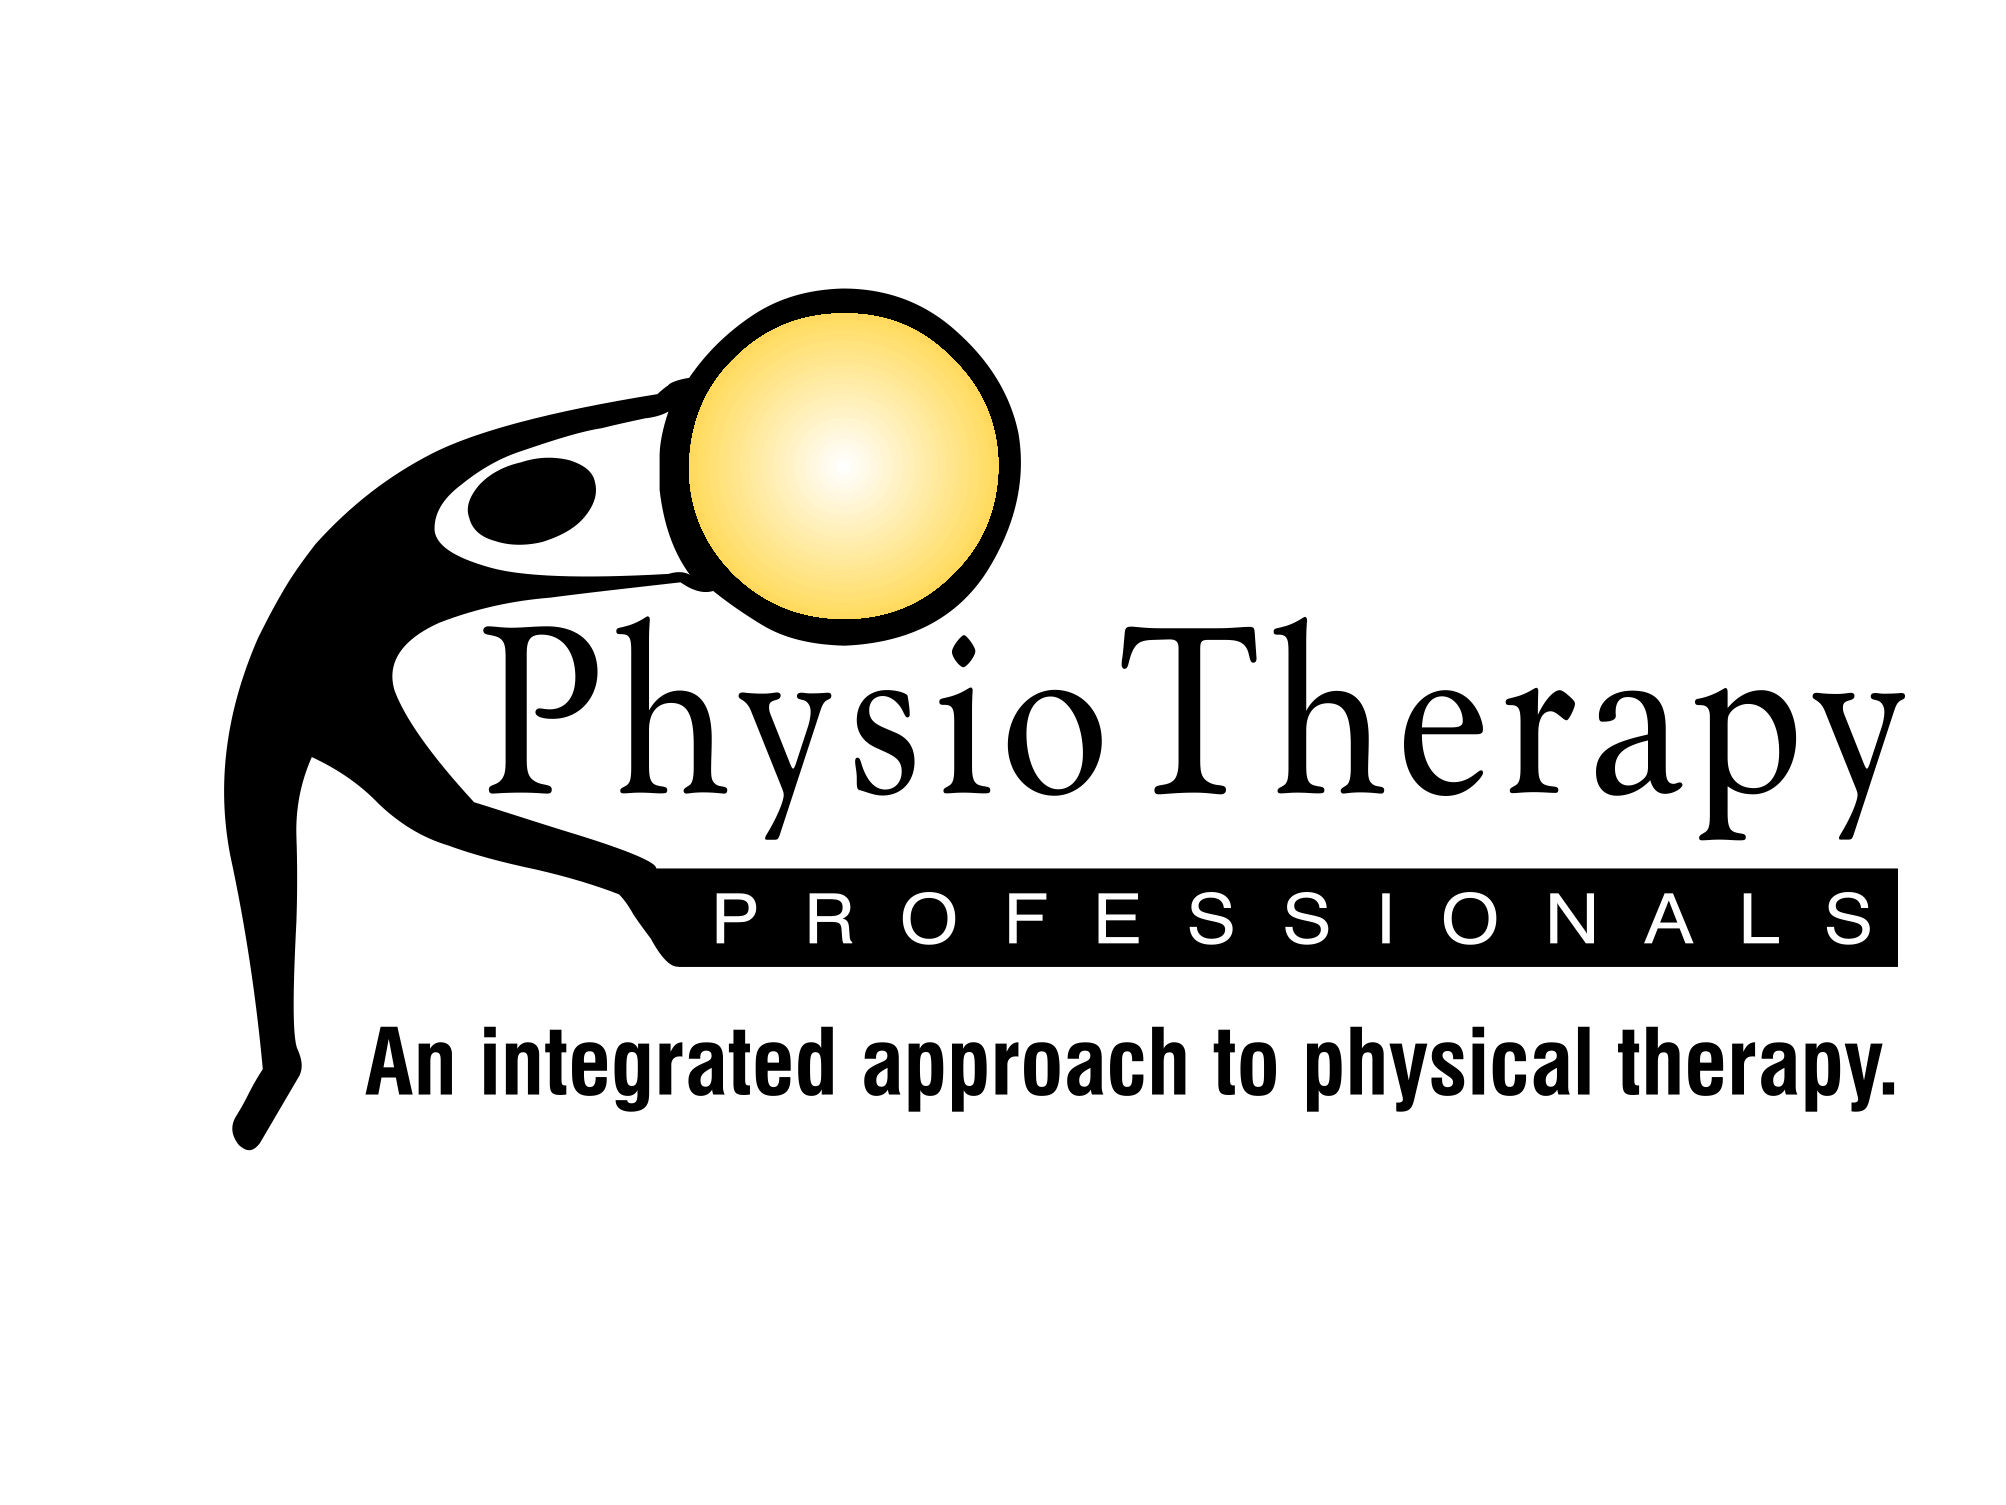 Physiotherapy Treatment Vector Hd Images, Physiotherapy Medical Logo Design  With Care And Plus Icon Concept For Treatment, Logo Icons, Plus Icons,  Medical Icons PNG Image For Free Download